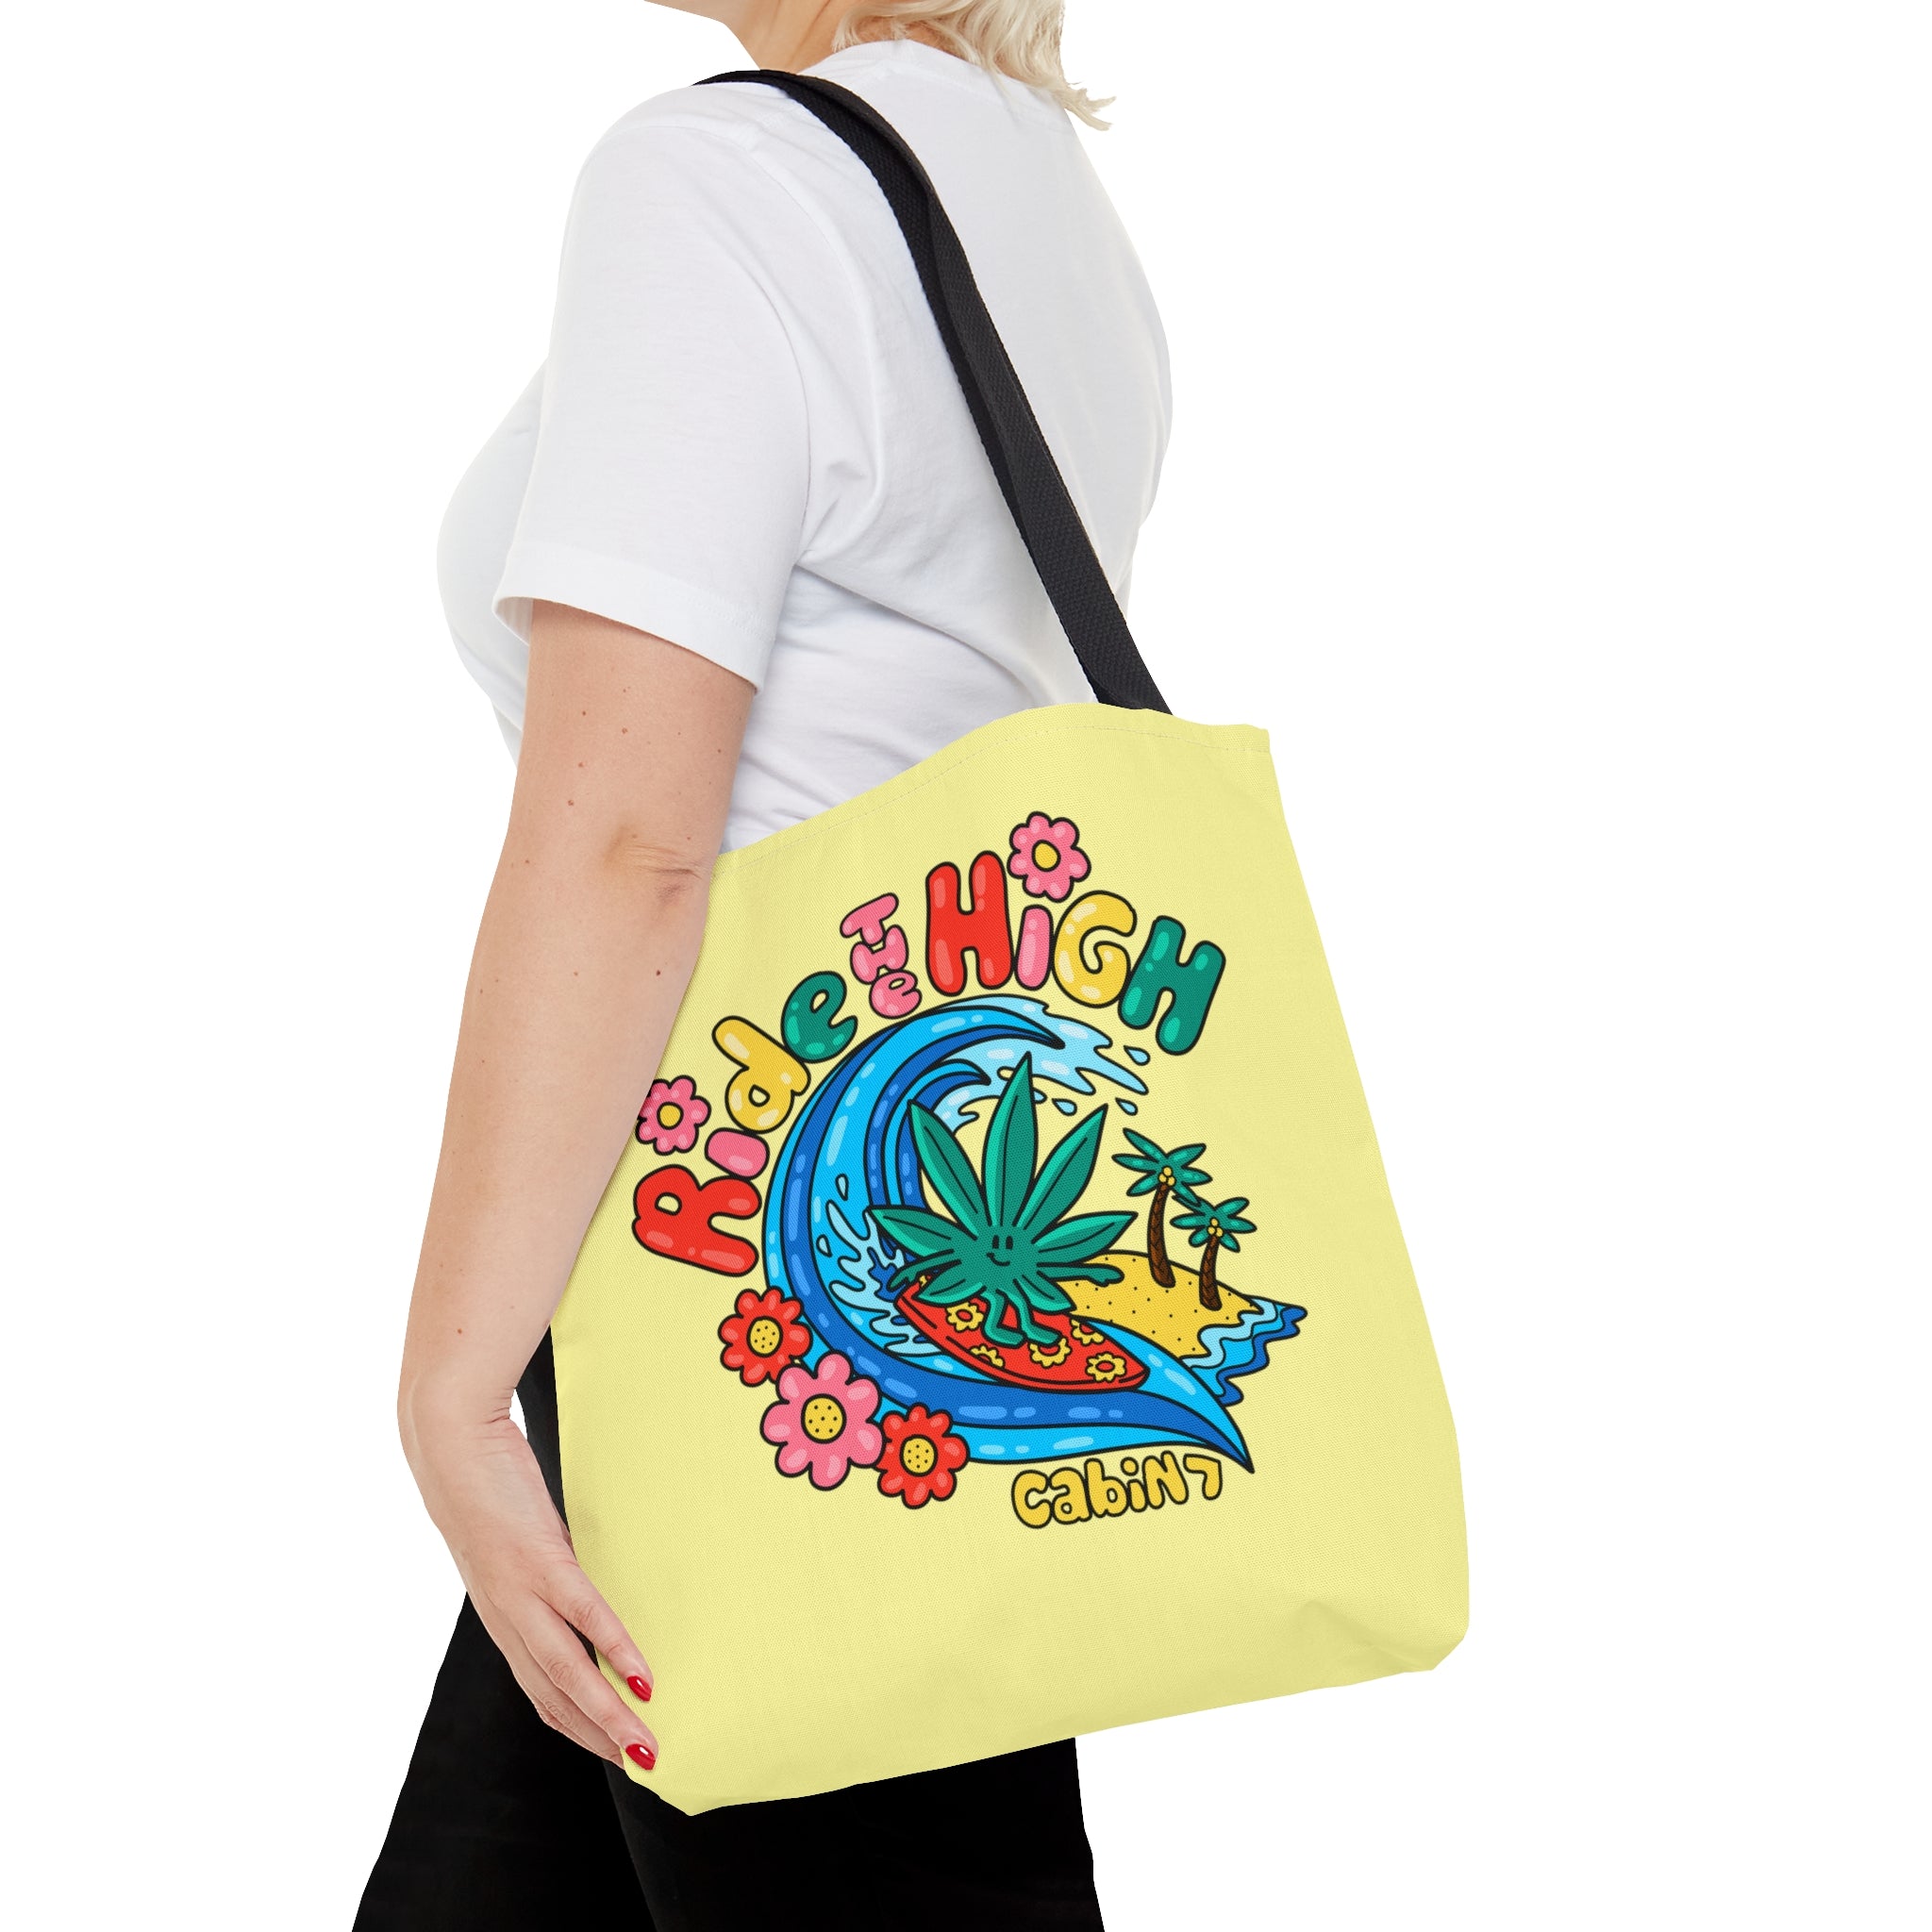 Ride The High Tote Bag